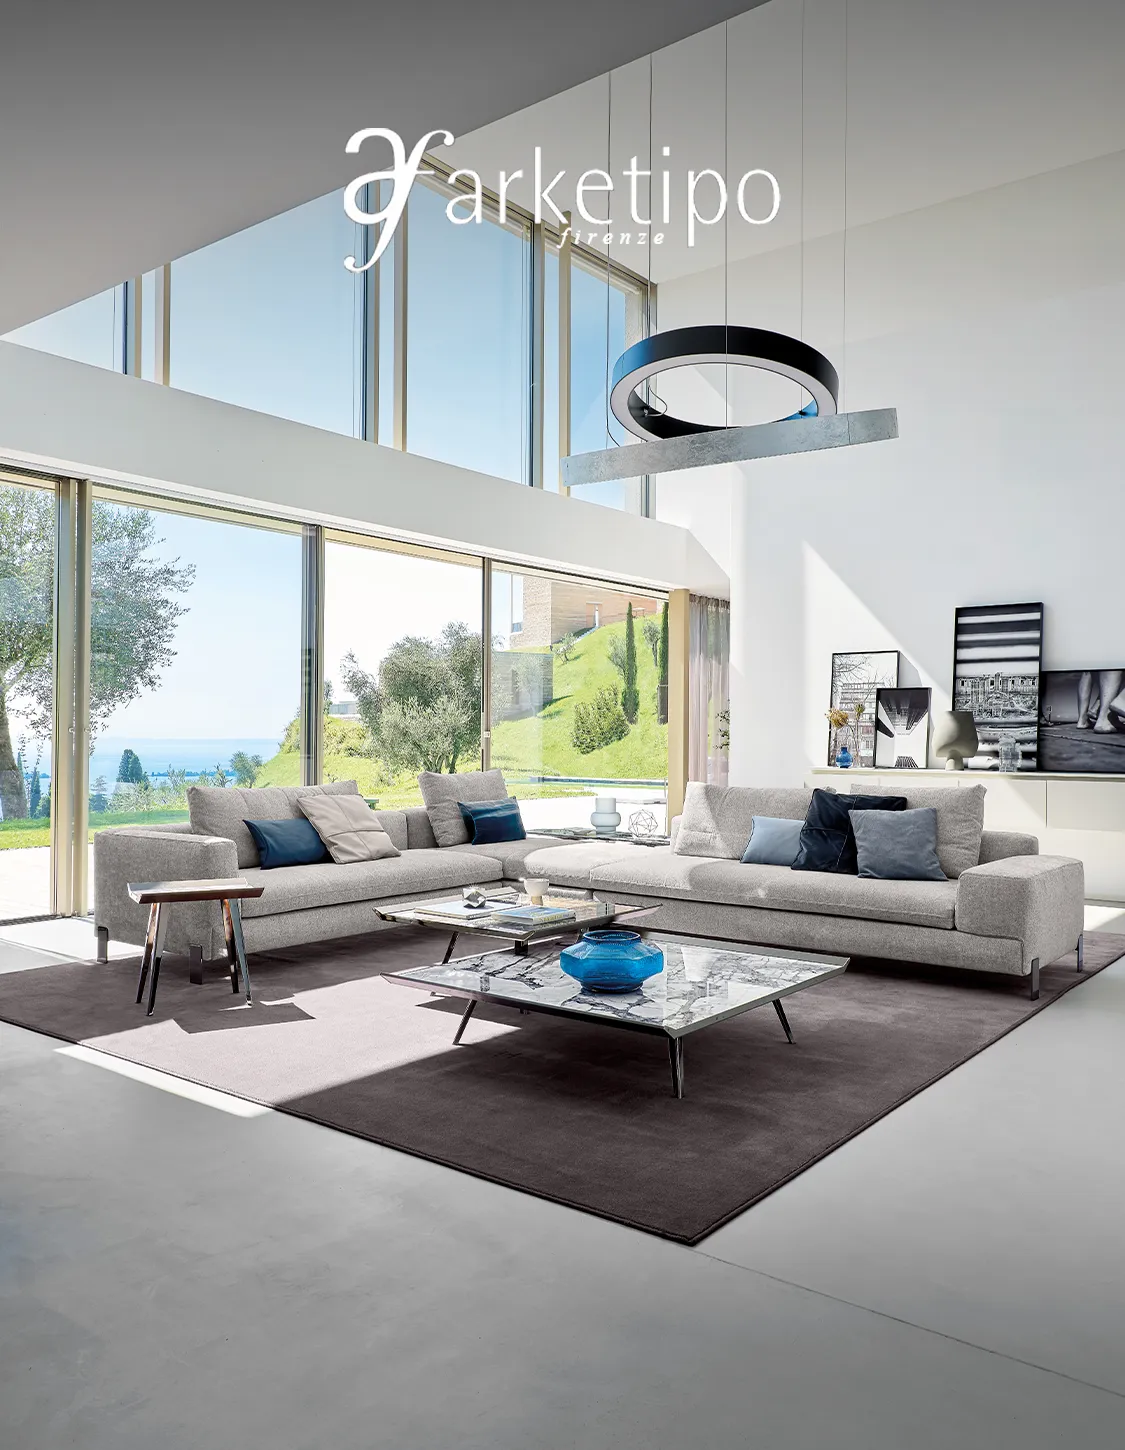 Arketipo Products